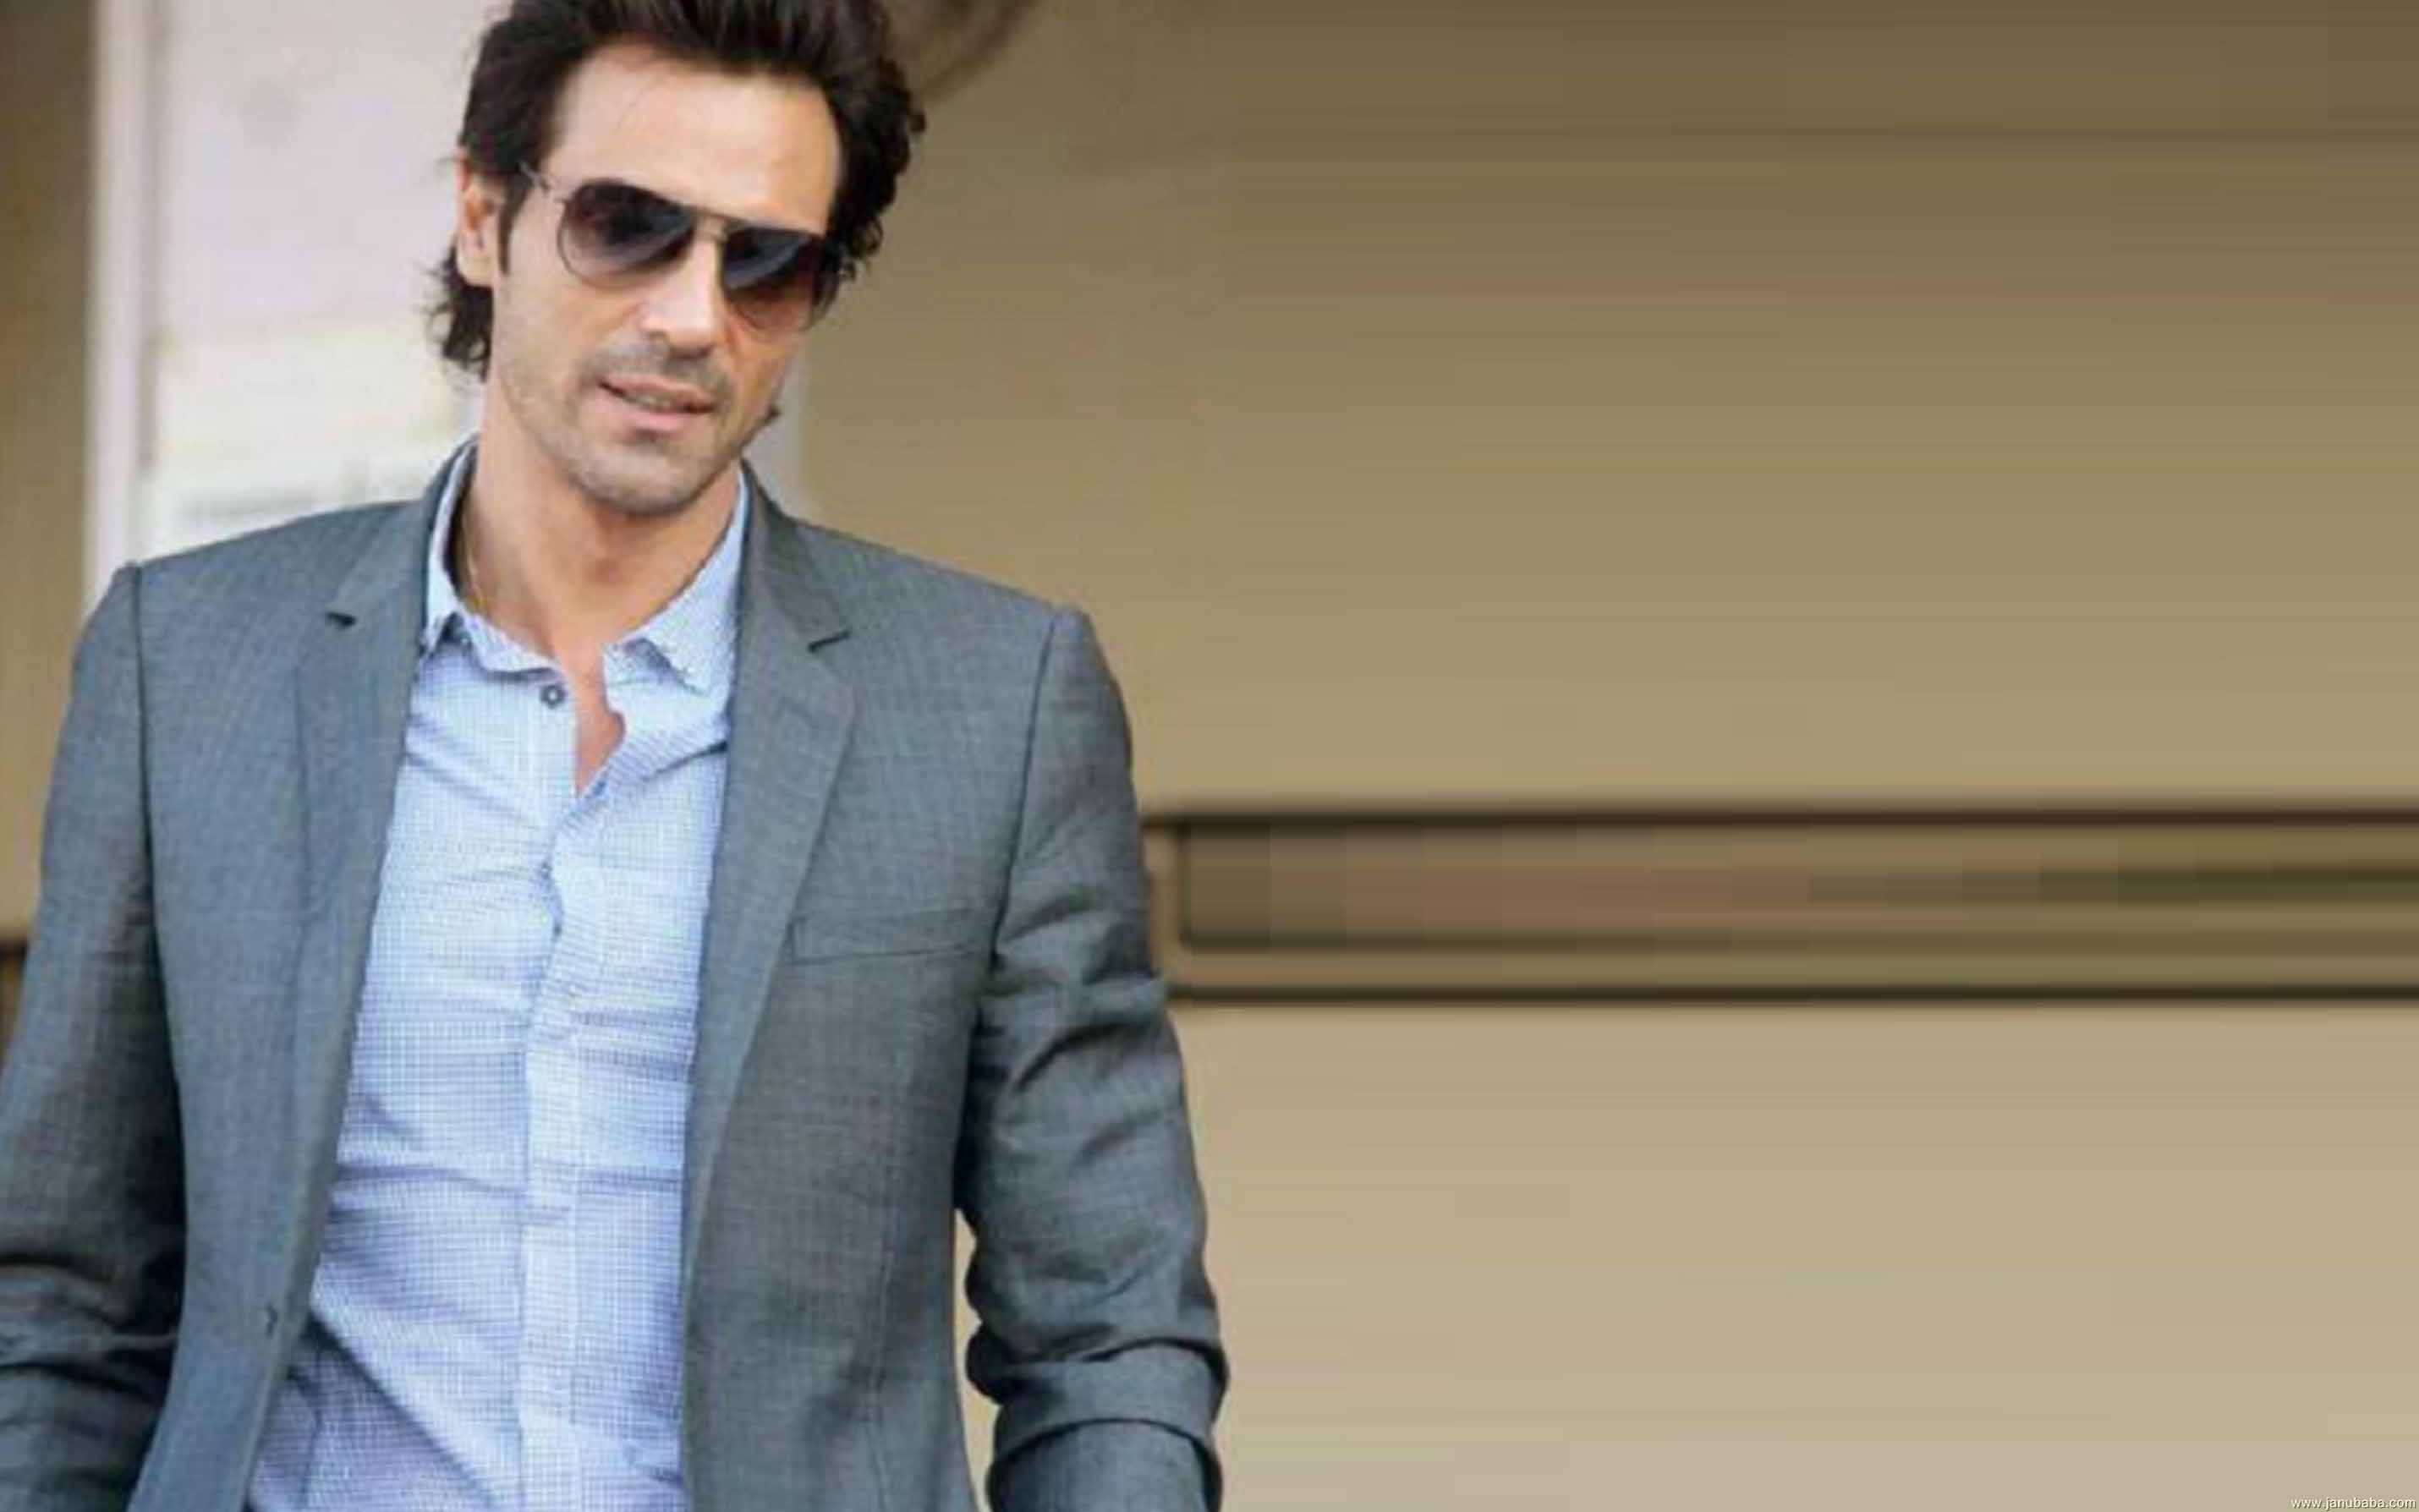 When Arjun Rampal Thanked His Team For Their Help